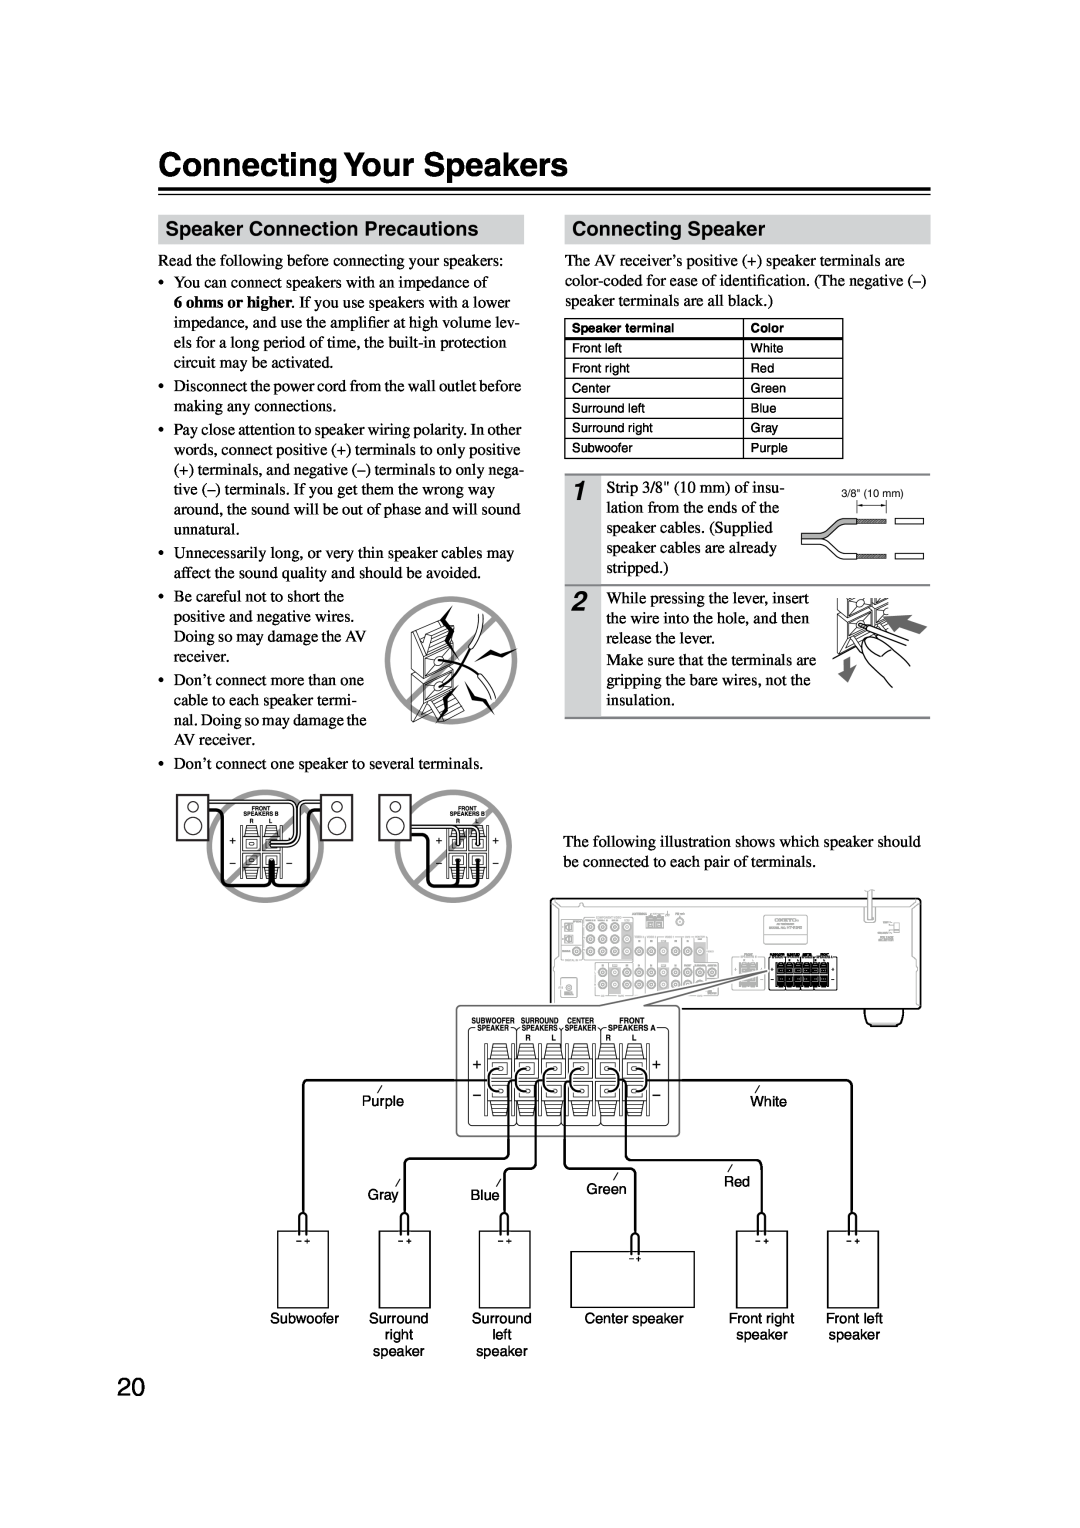 Onkyo HT-S590 instruction manual Connecting Your Speakers, Speaker Connection Precautions, Connecting Speaker 